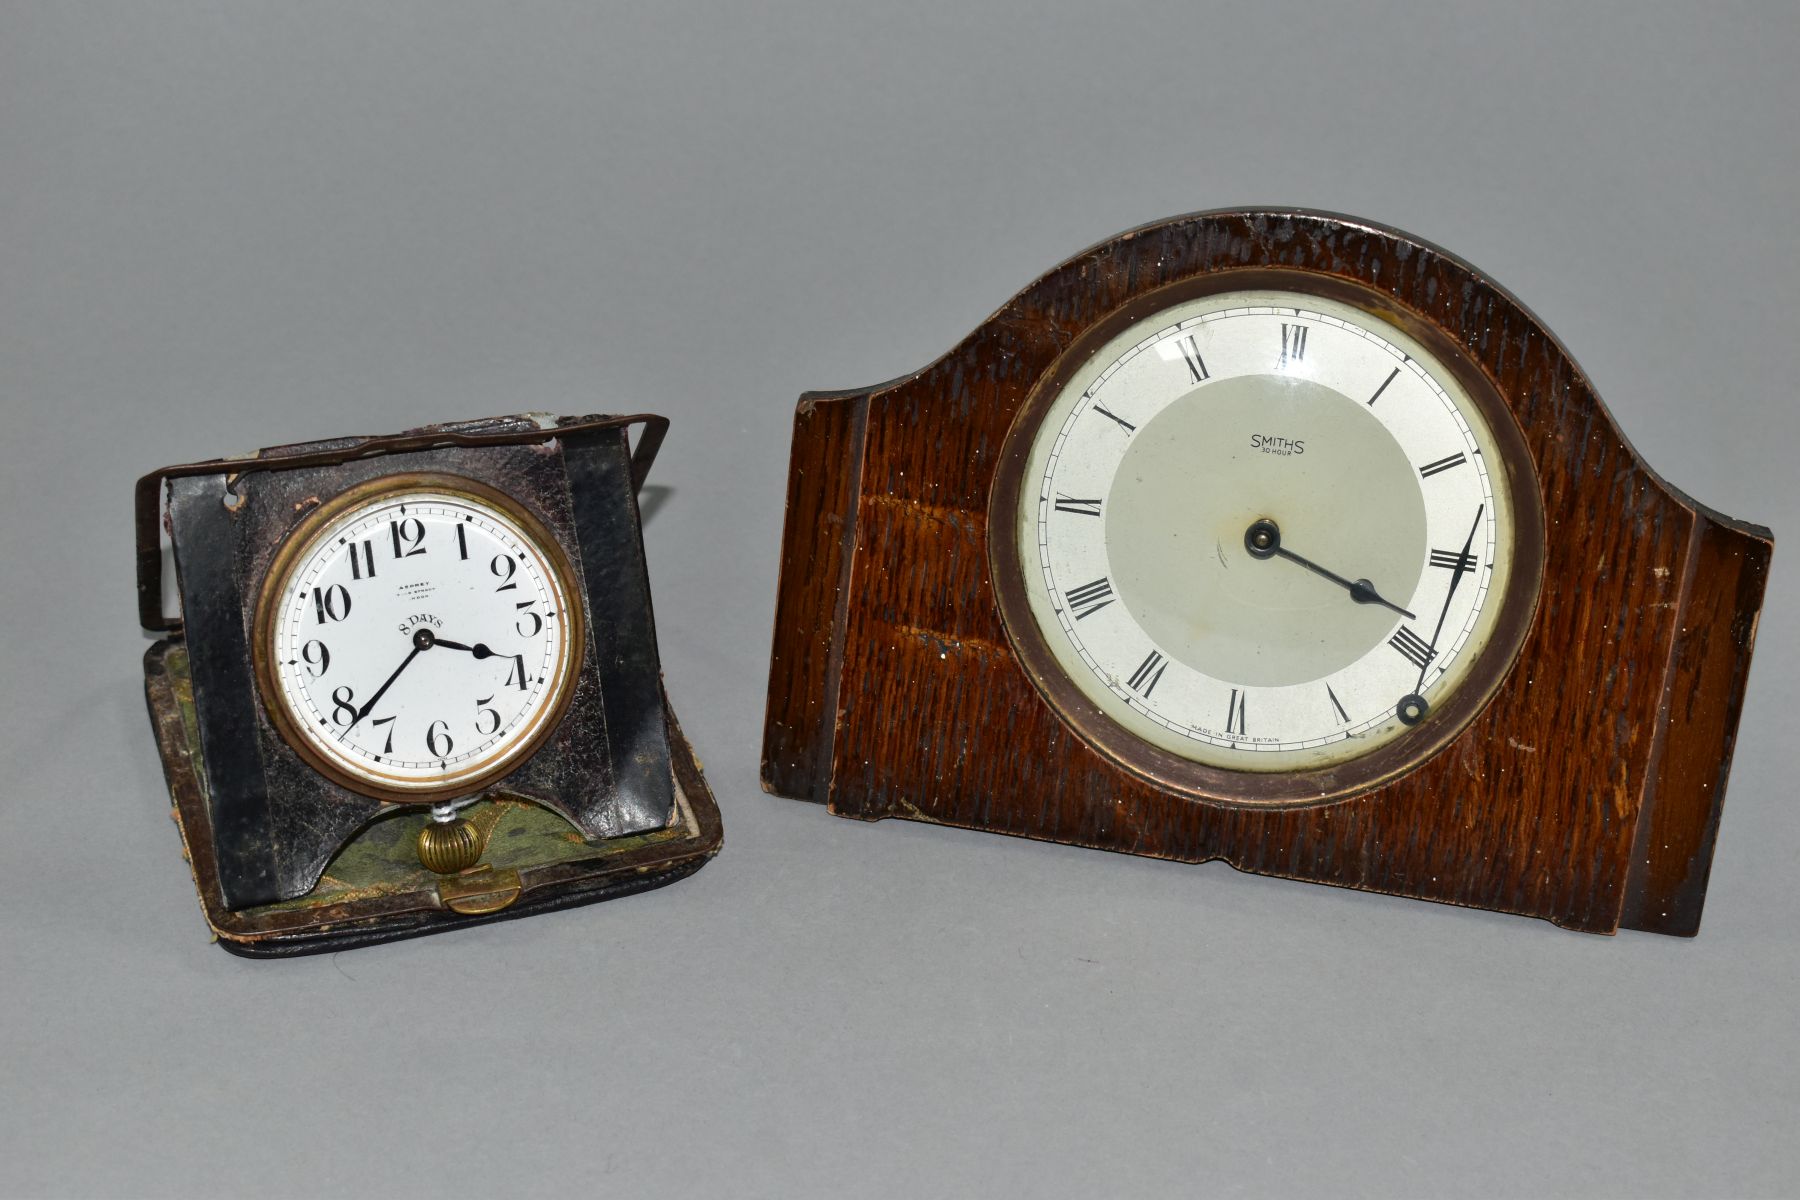 AN EARLY 20TH CENTURY ASPREY 8 DAY TRAVEL CLOCK, in a damaged leather folding case, incomplete,